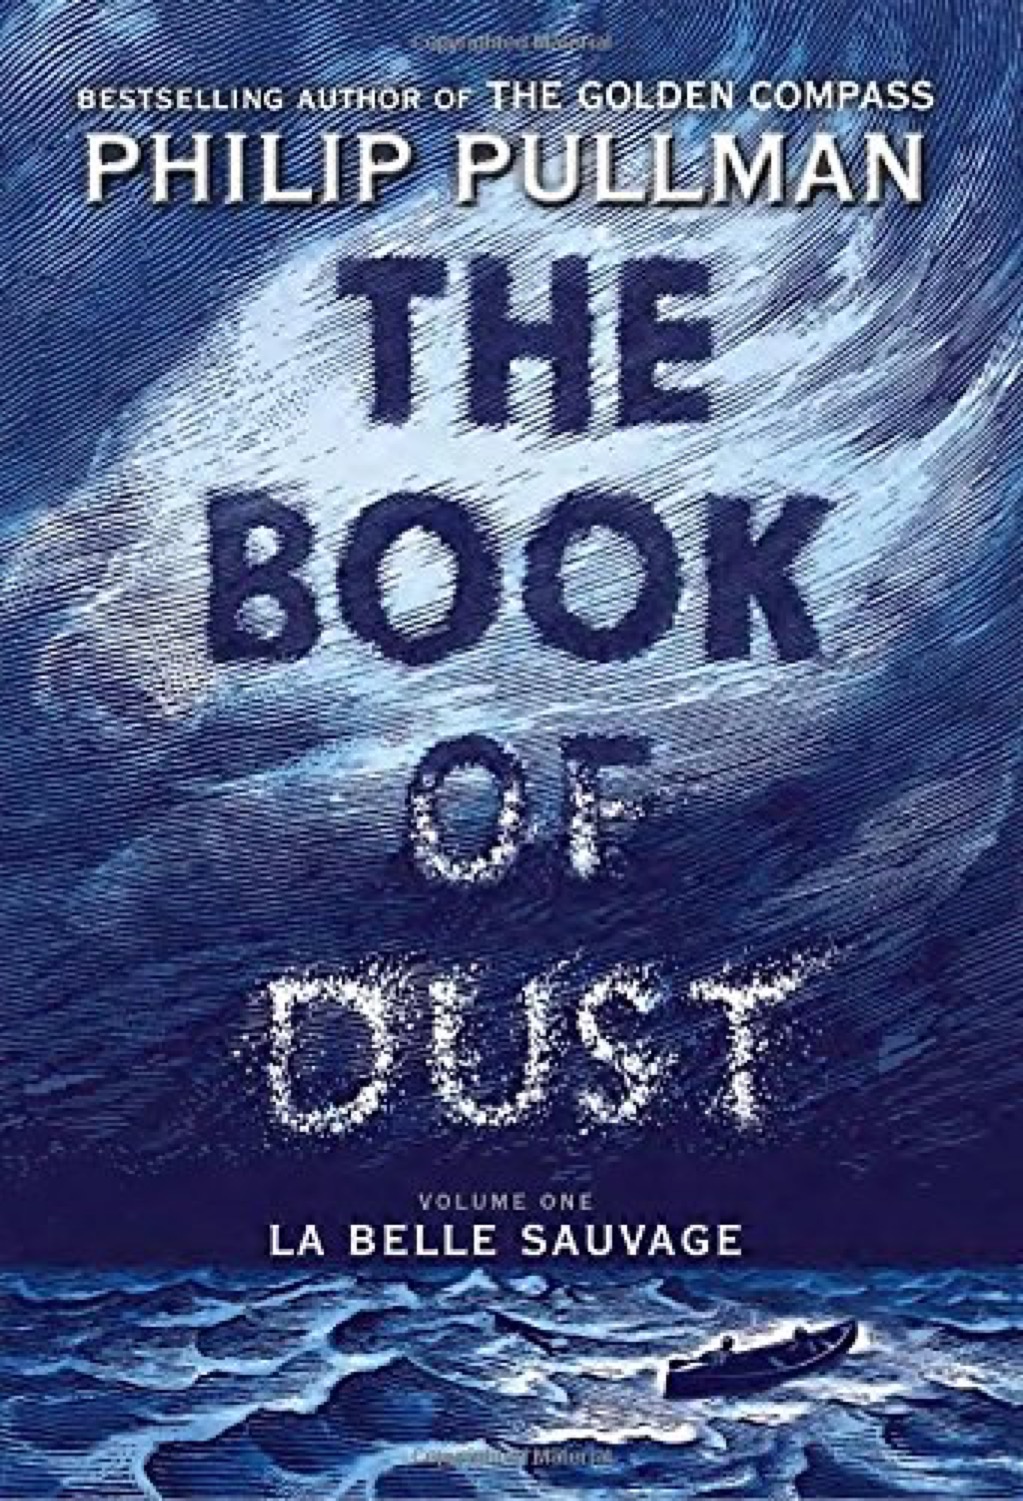 Book of Dust cover.